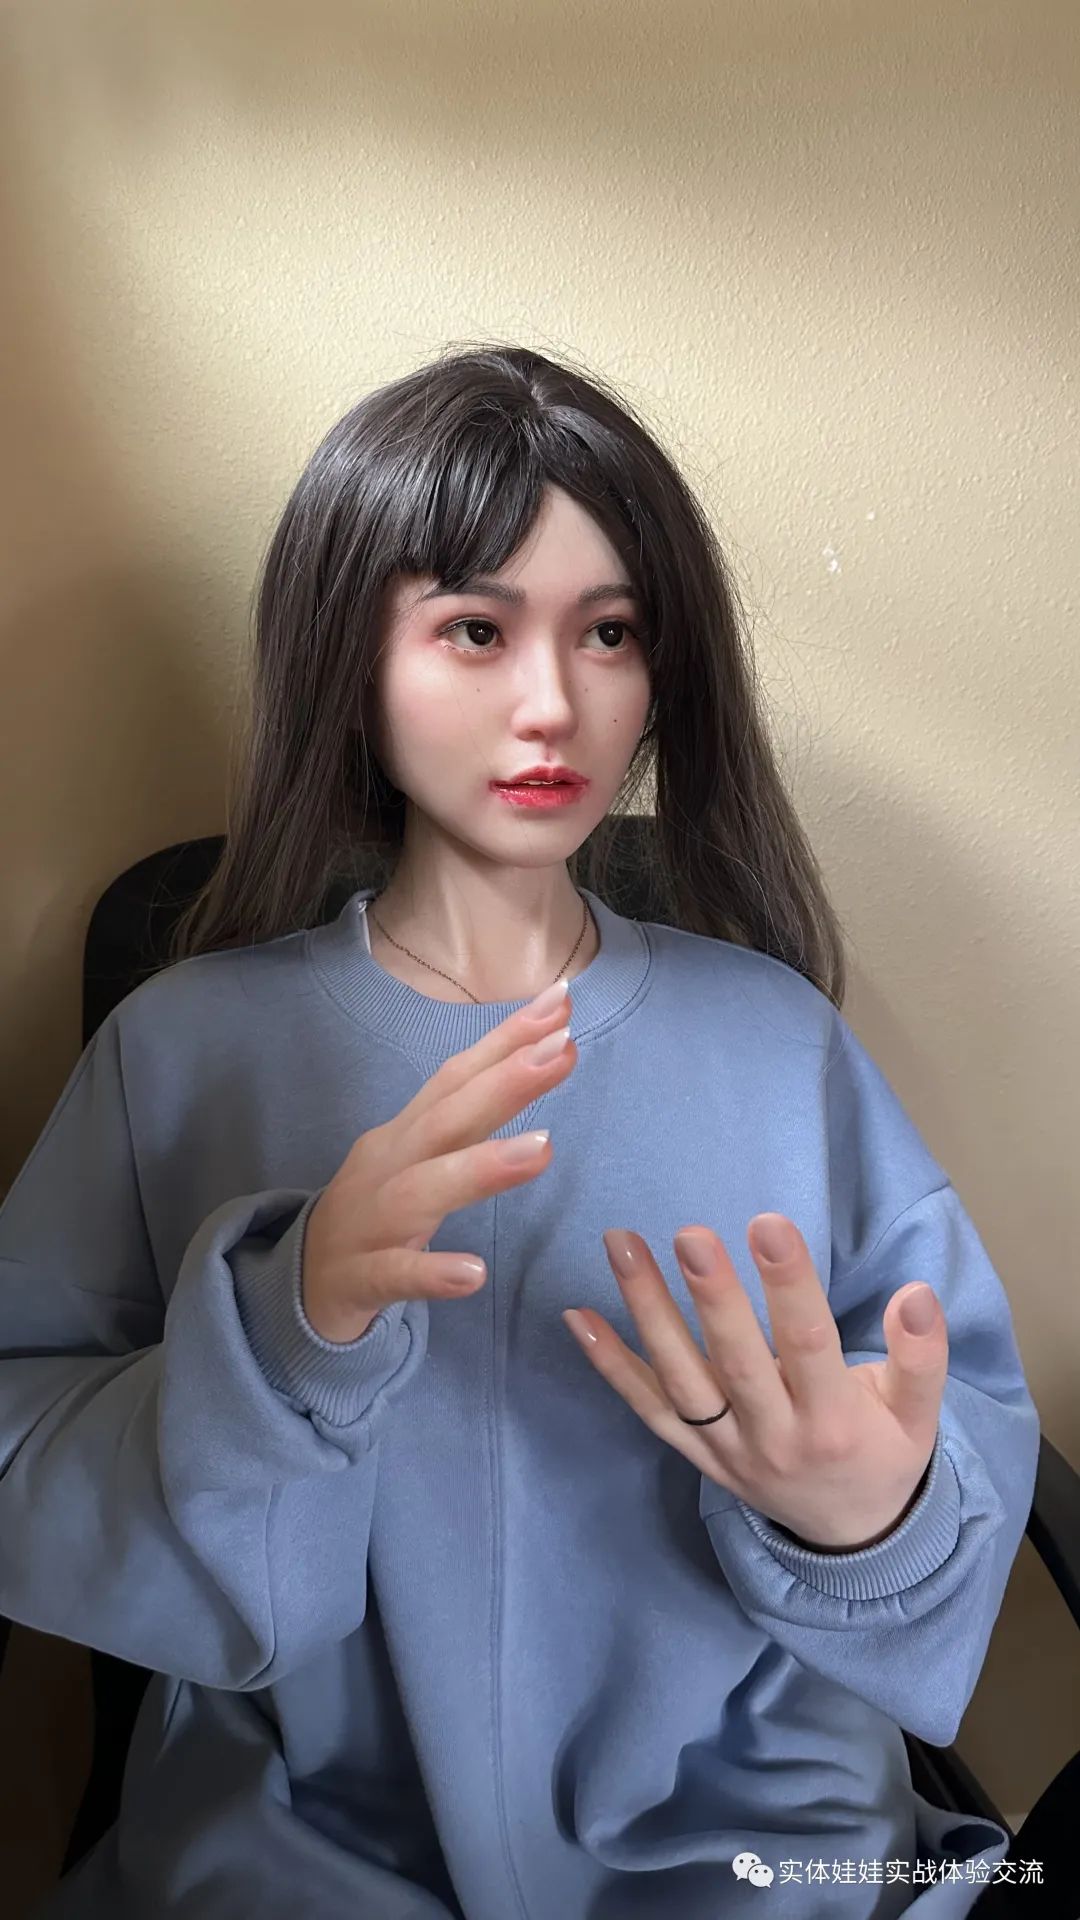 How did the simulation doll come from?